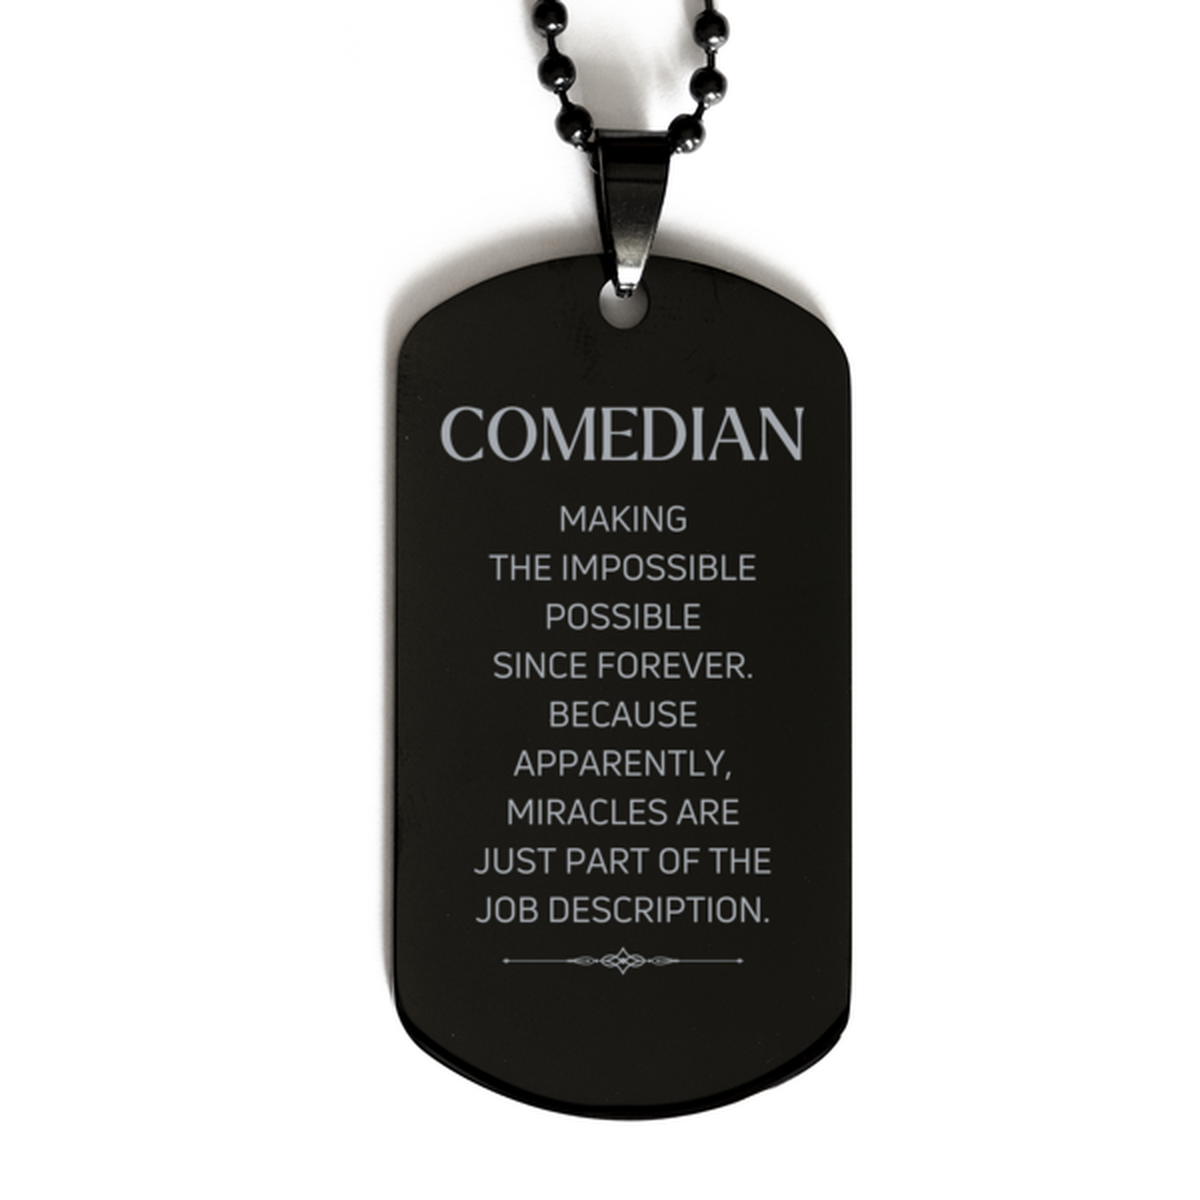 Funny Comedian Gifts, Miracles are just part of the job description, Inspirational Birthday Black Dog Tag For Comedian, Men, Women, Coworkers, Friends, Boss